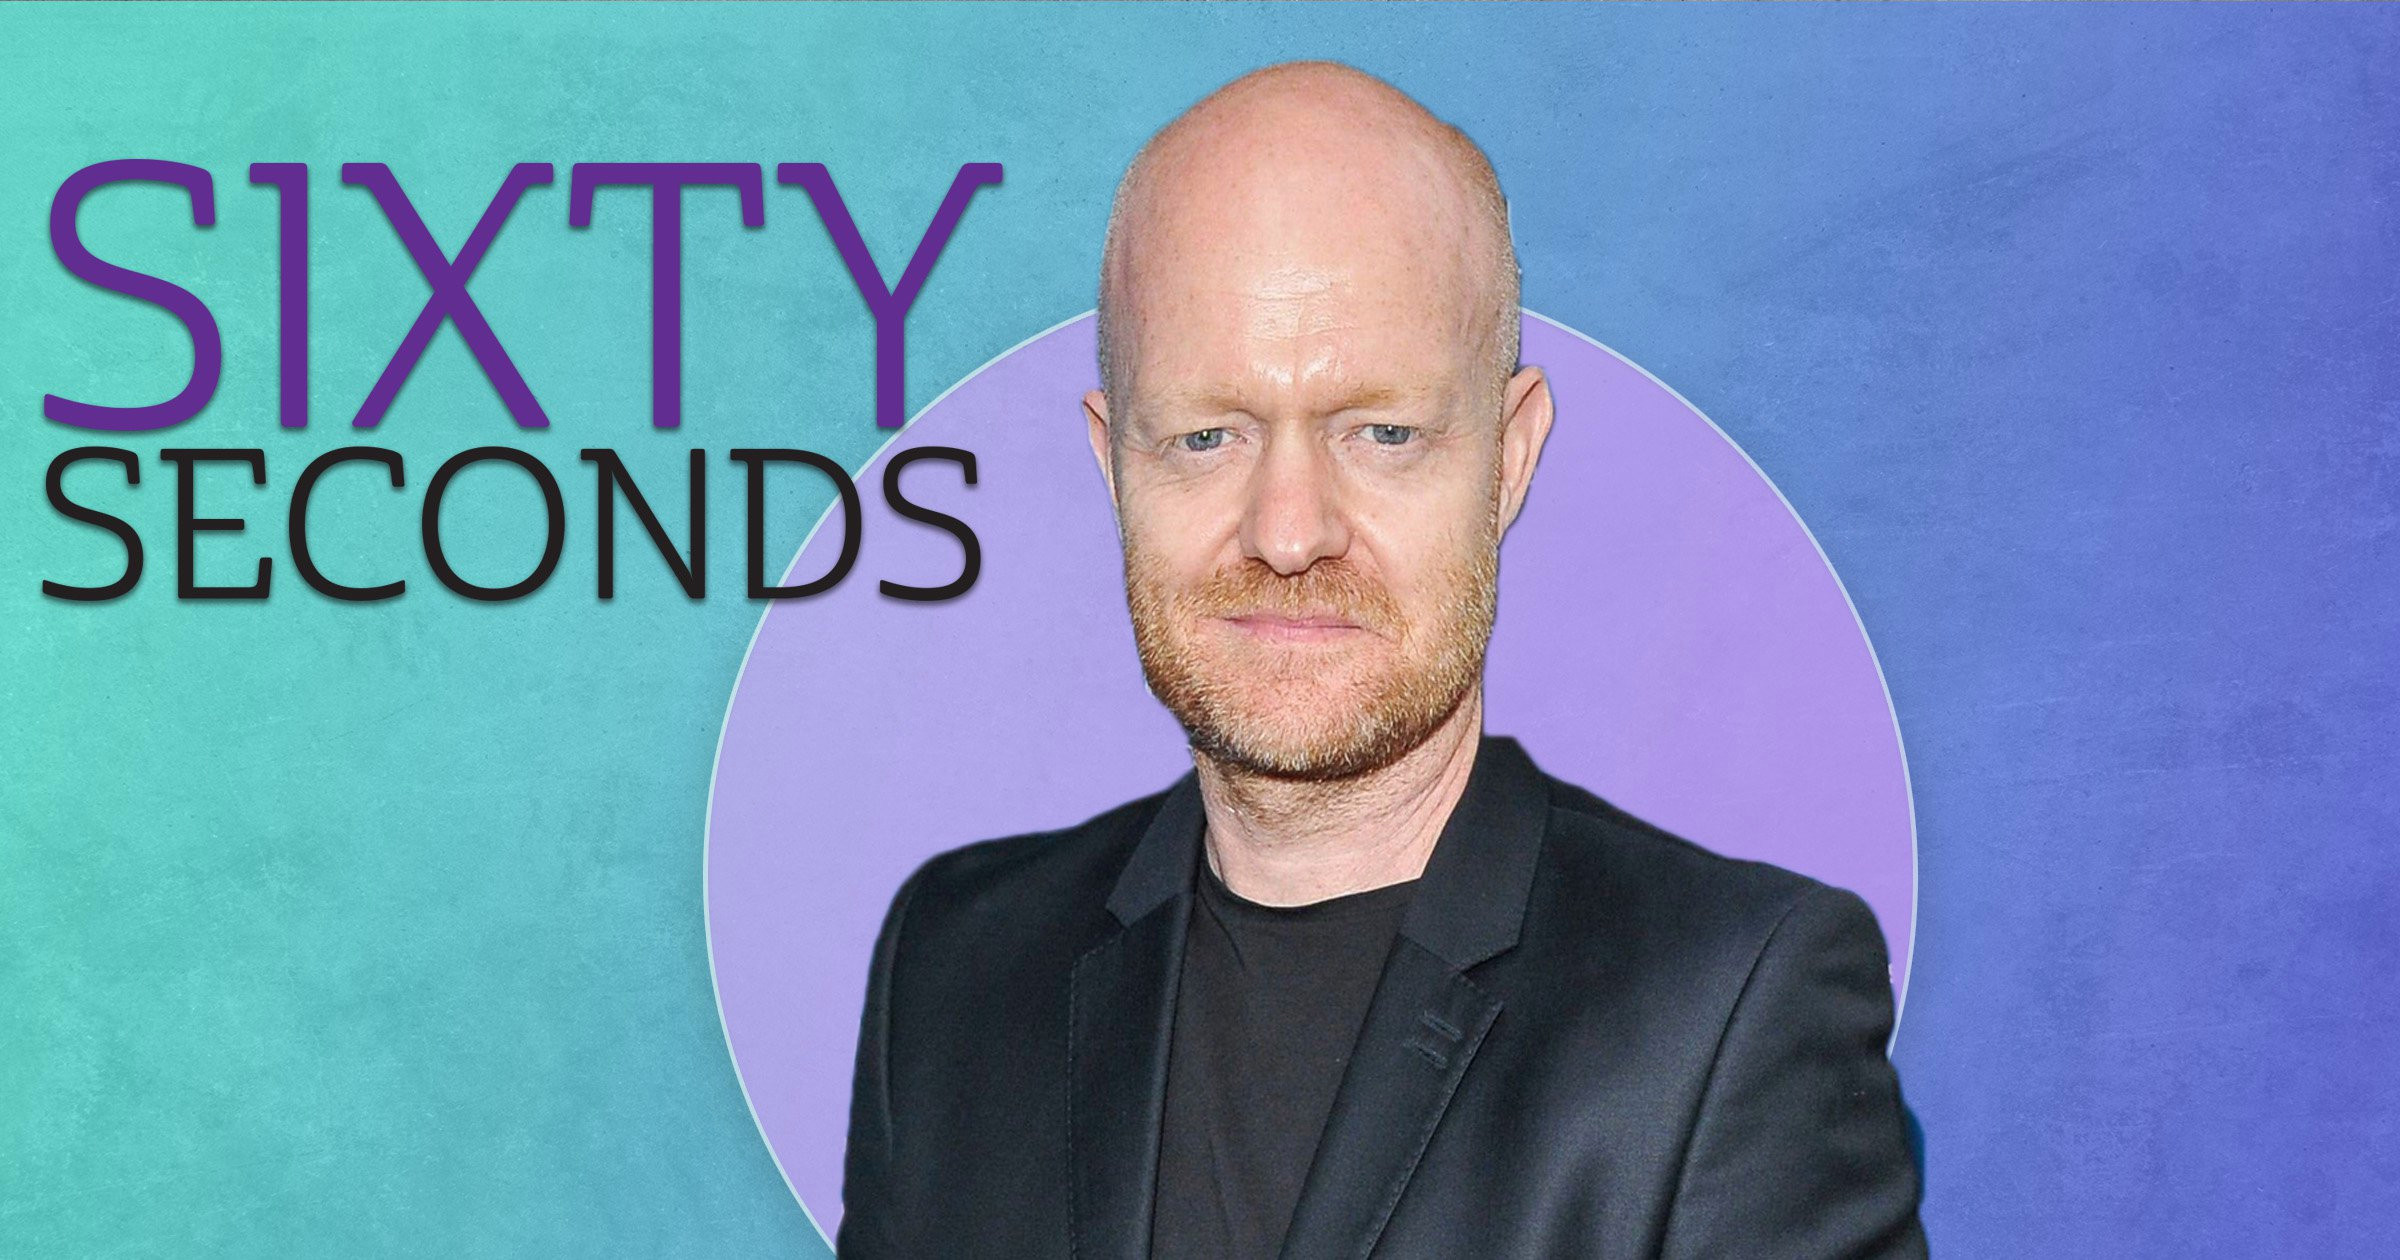 Jake Wood misses ‘absolutely nothing’ about Max Branning and EastEnders: ‘I’ve not looked back’